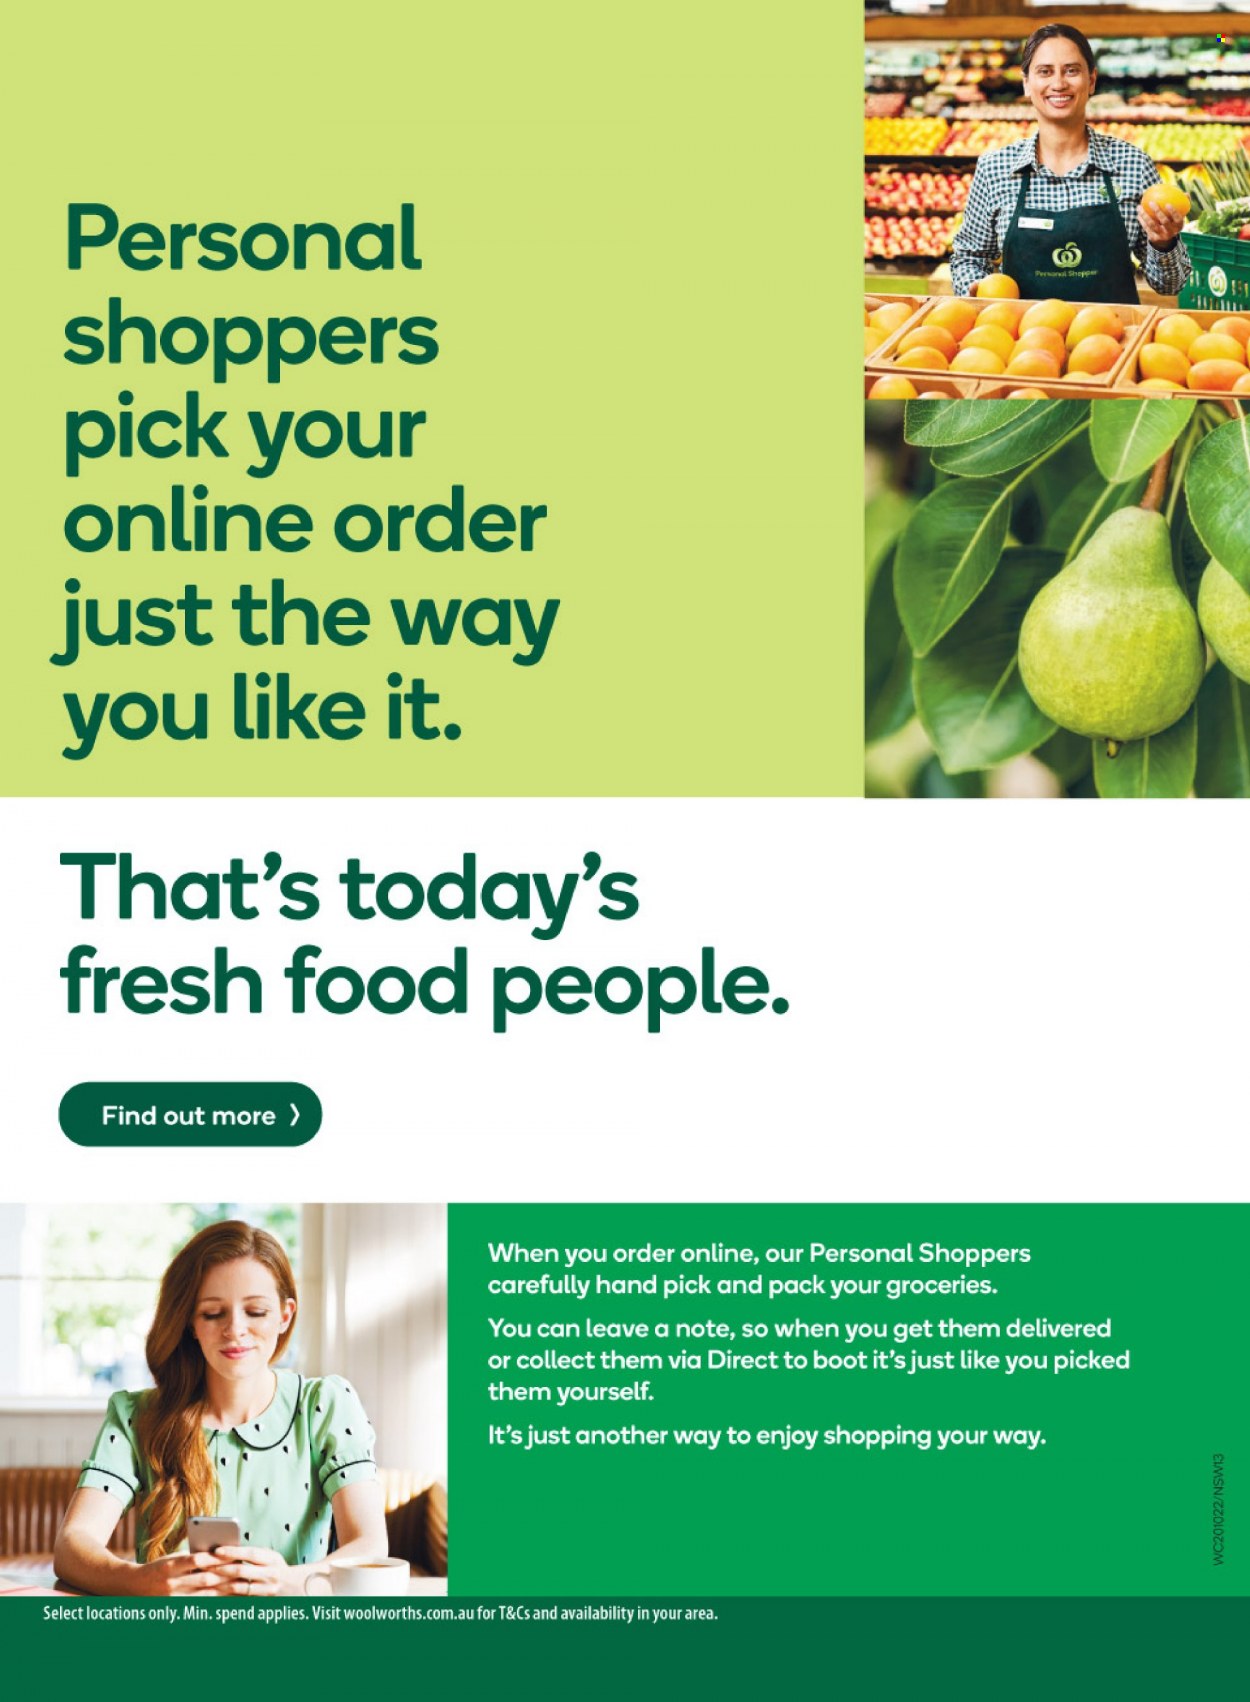 Woolworths catalogue - 20.10.2021 - 26.10.2021.